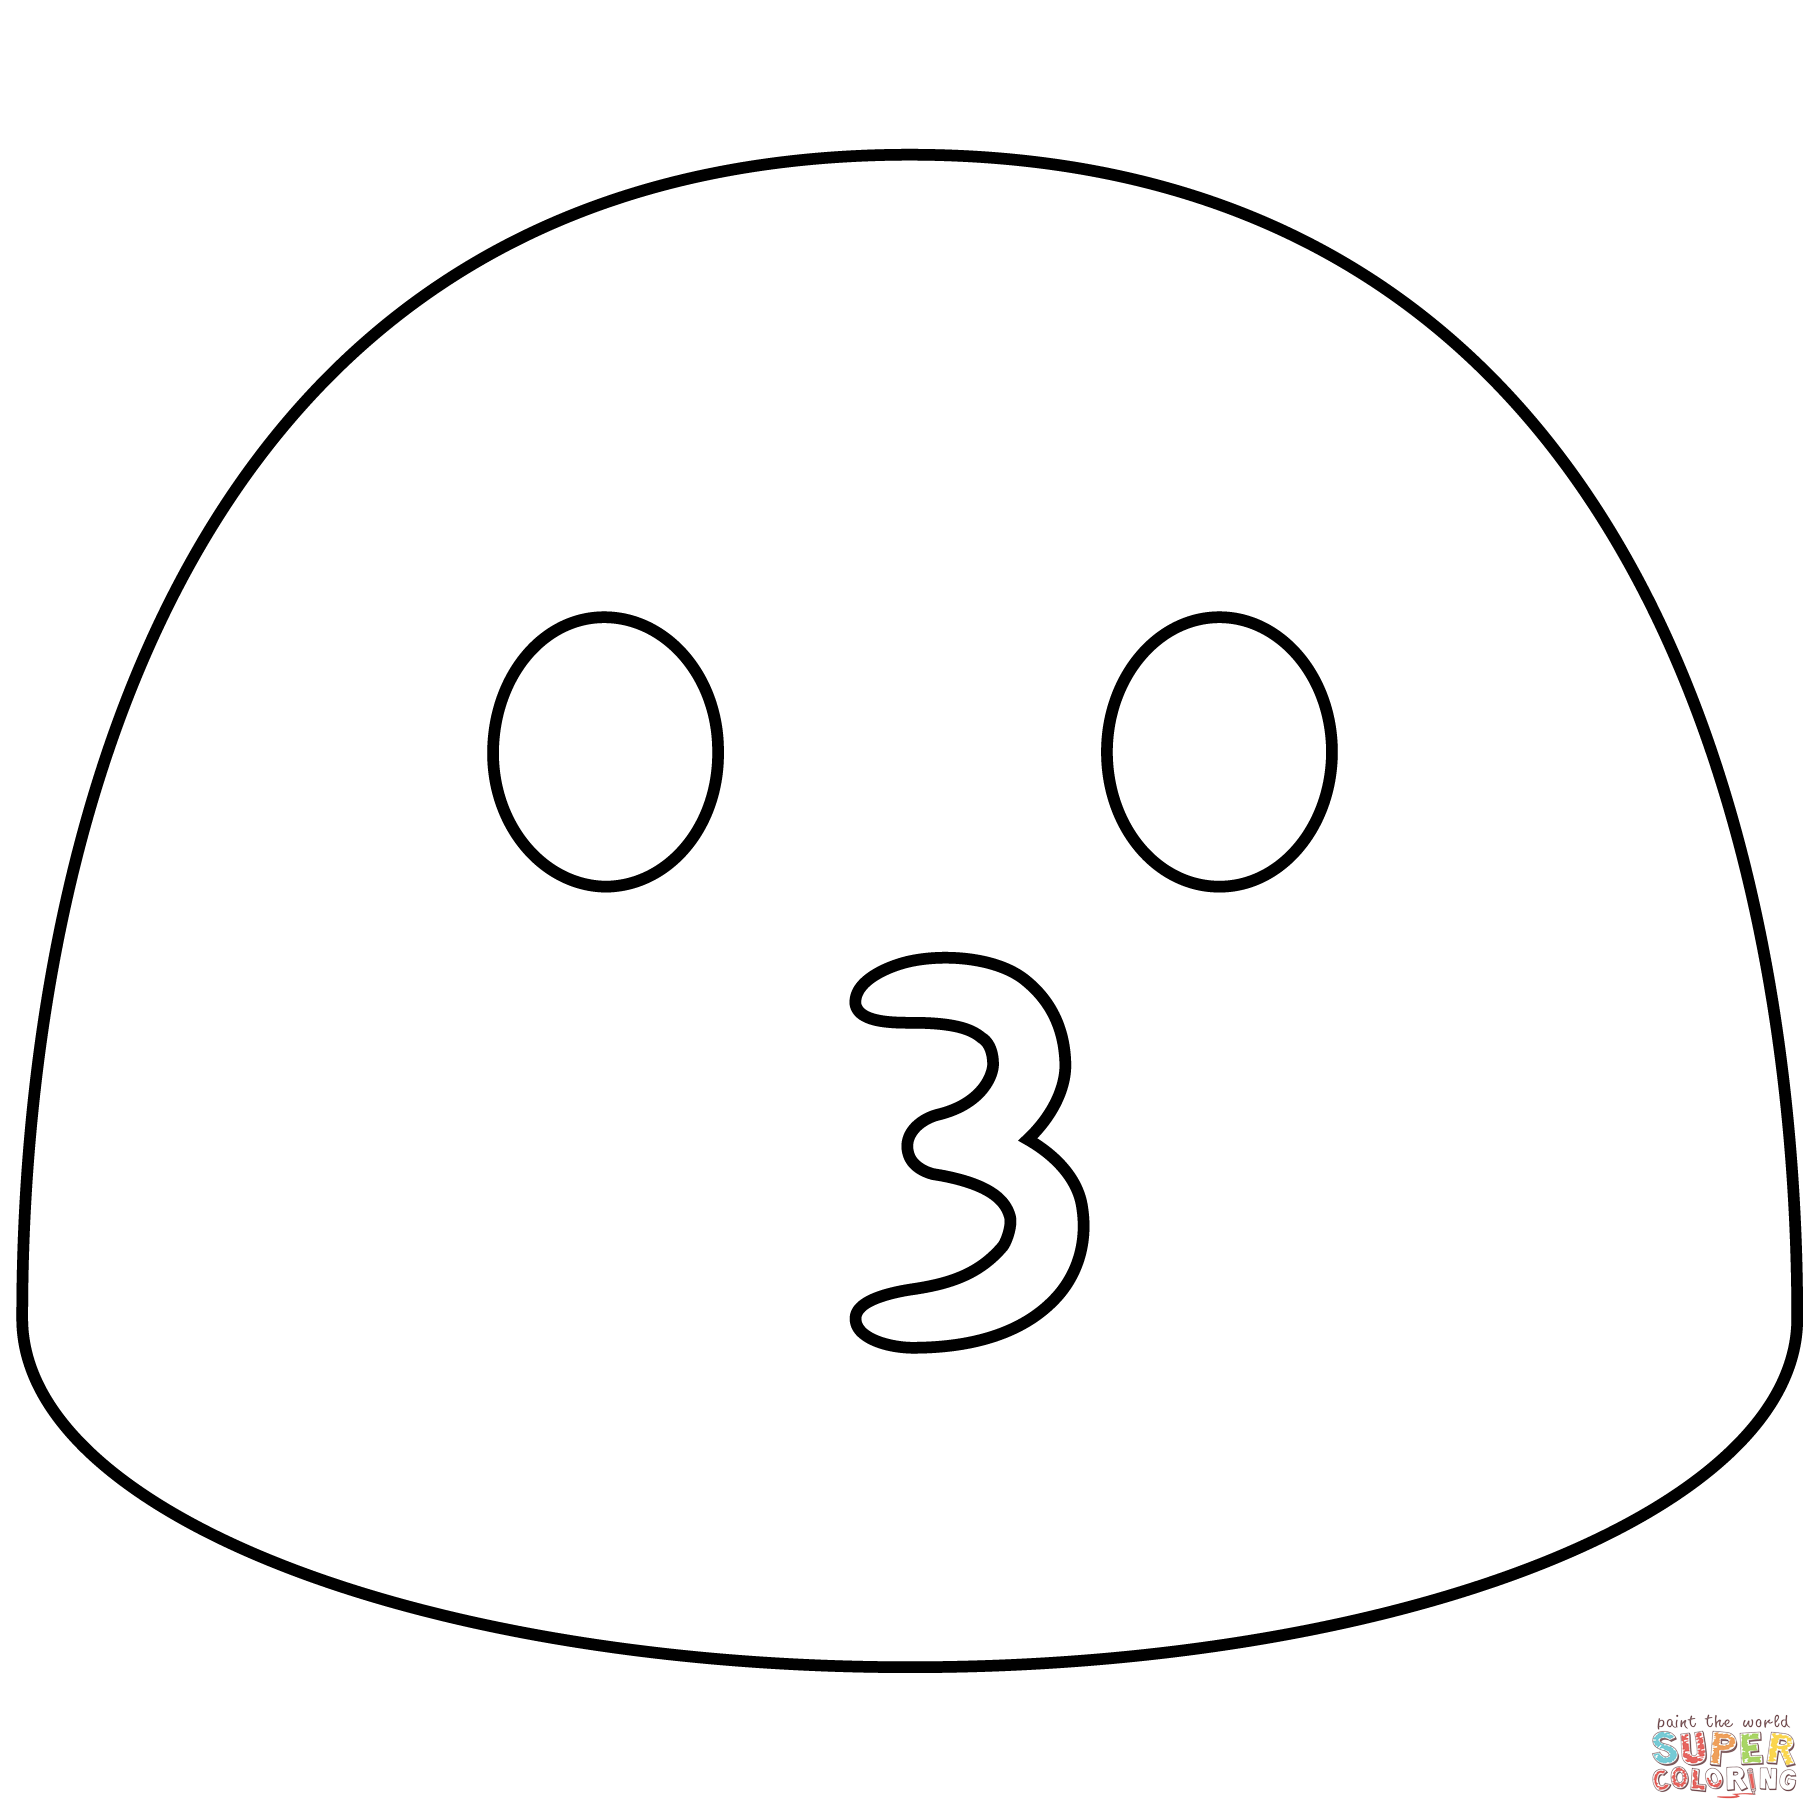 Kissing face emoji coloring page free printable coloring pages